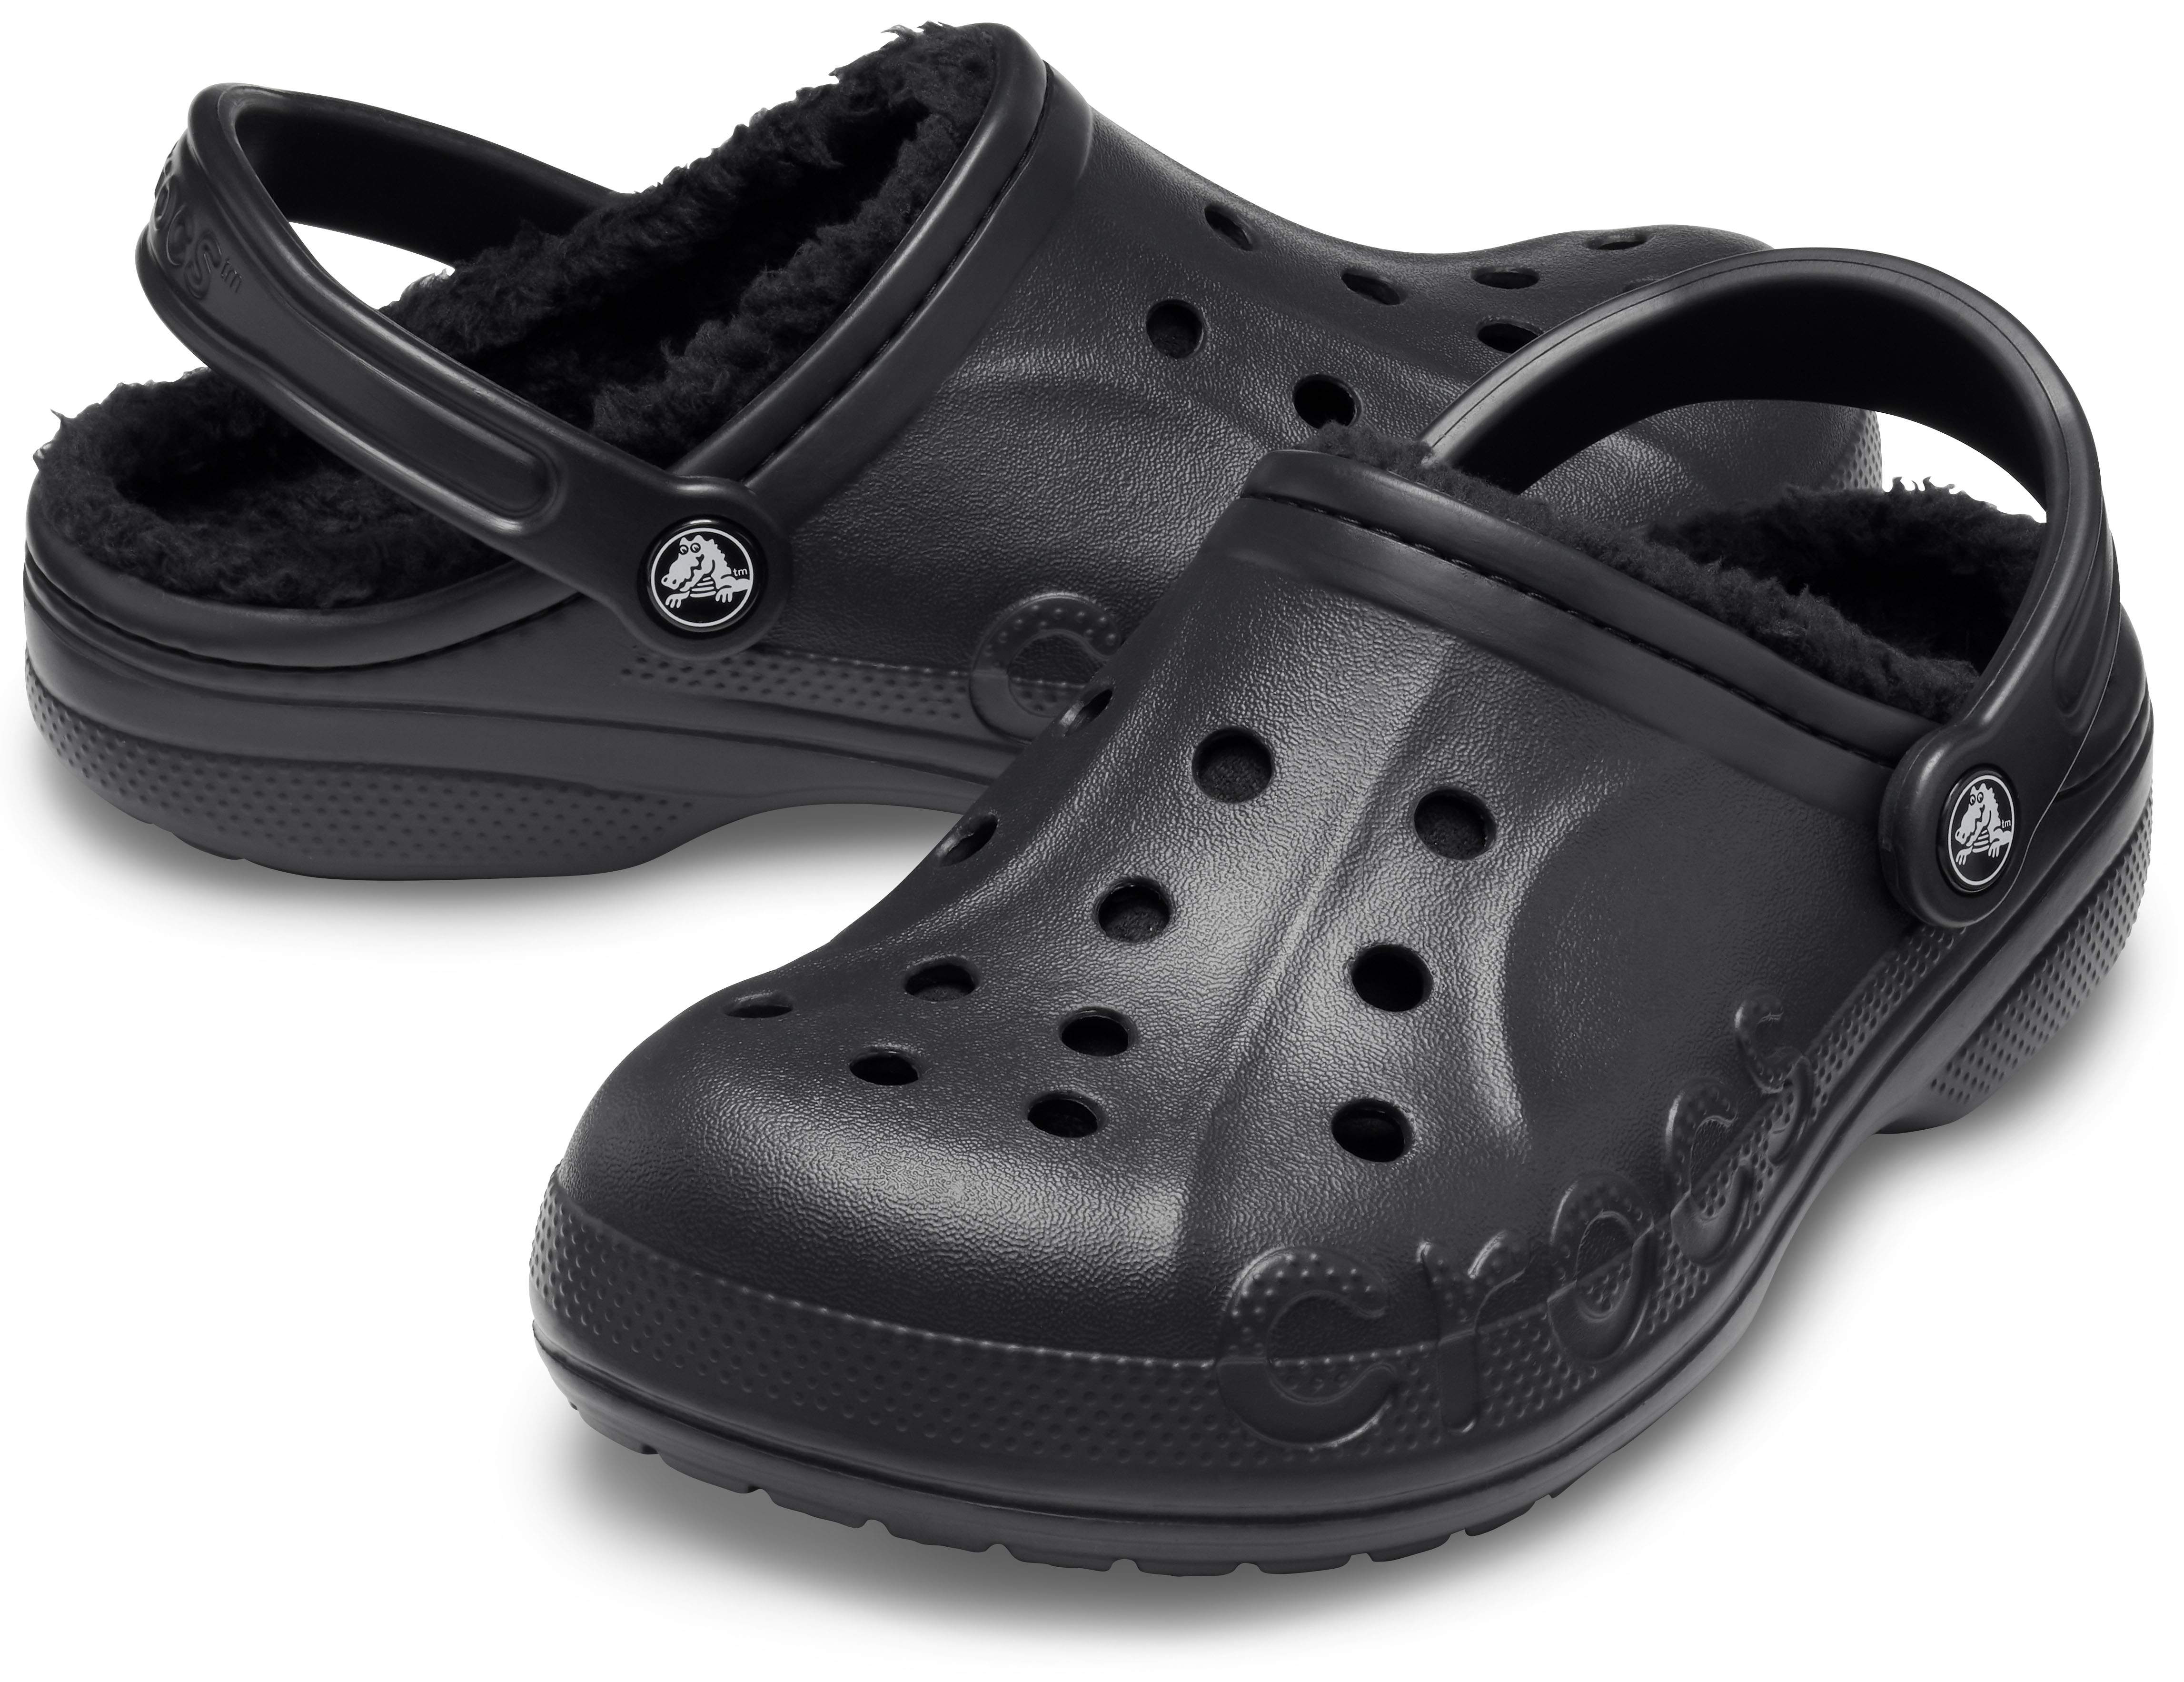 crocs liners replacement